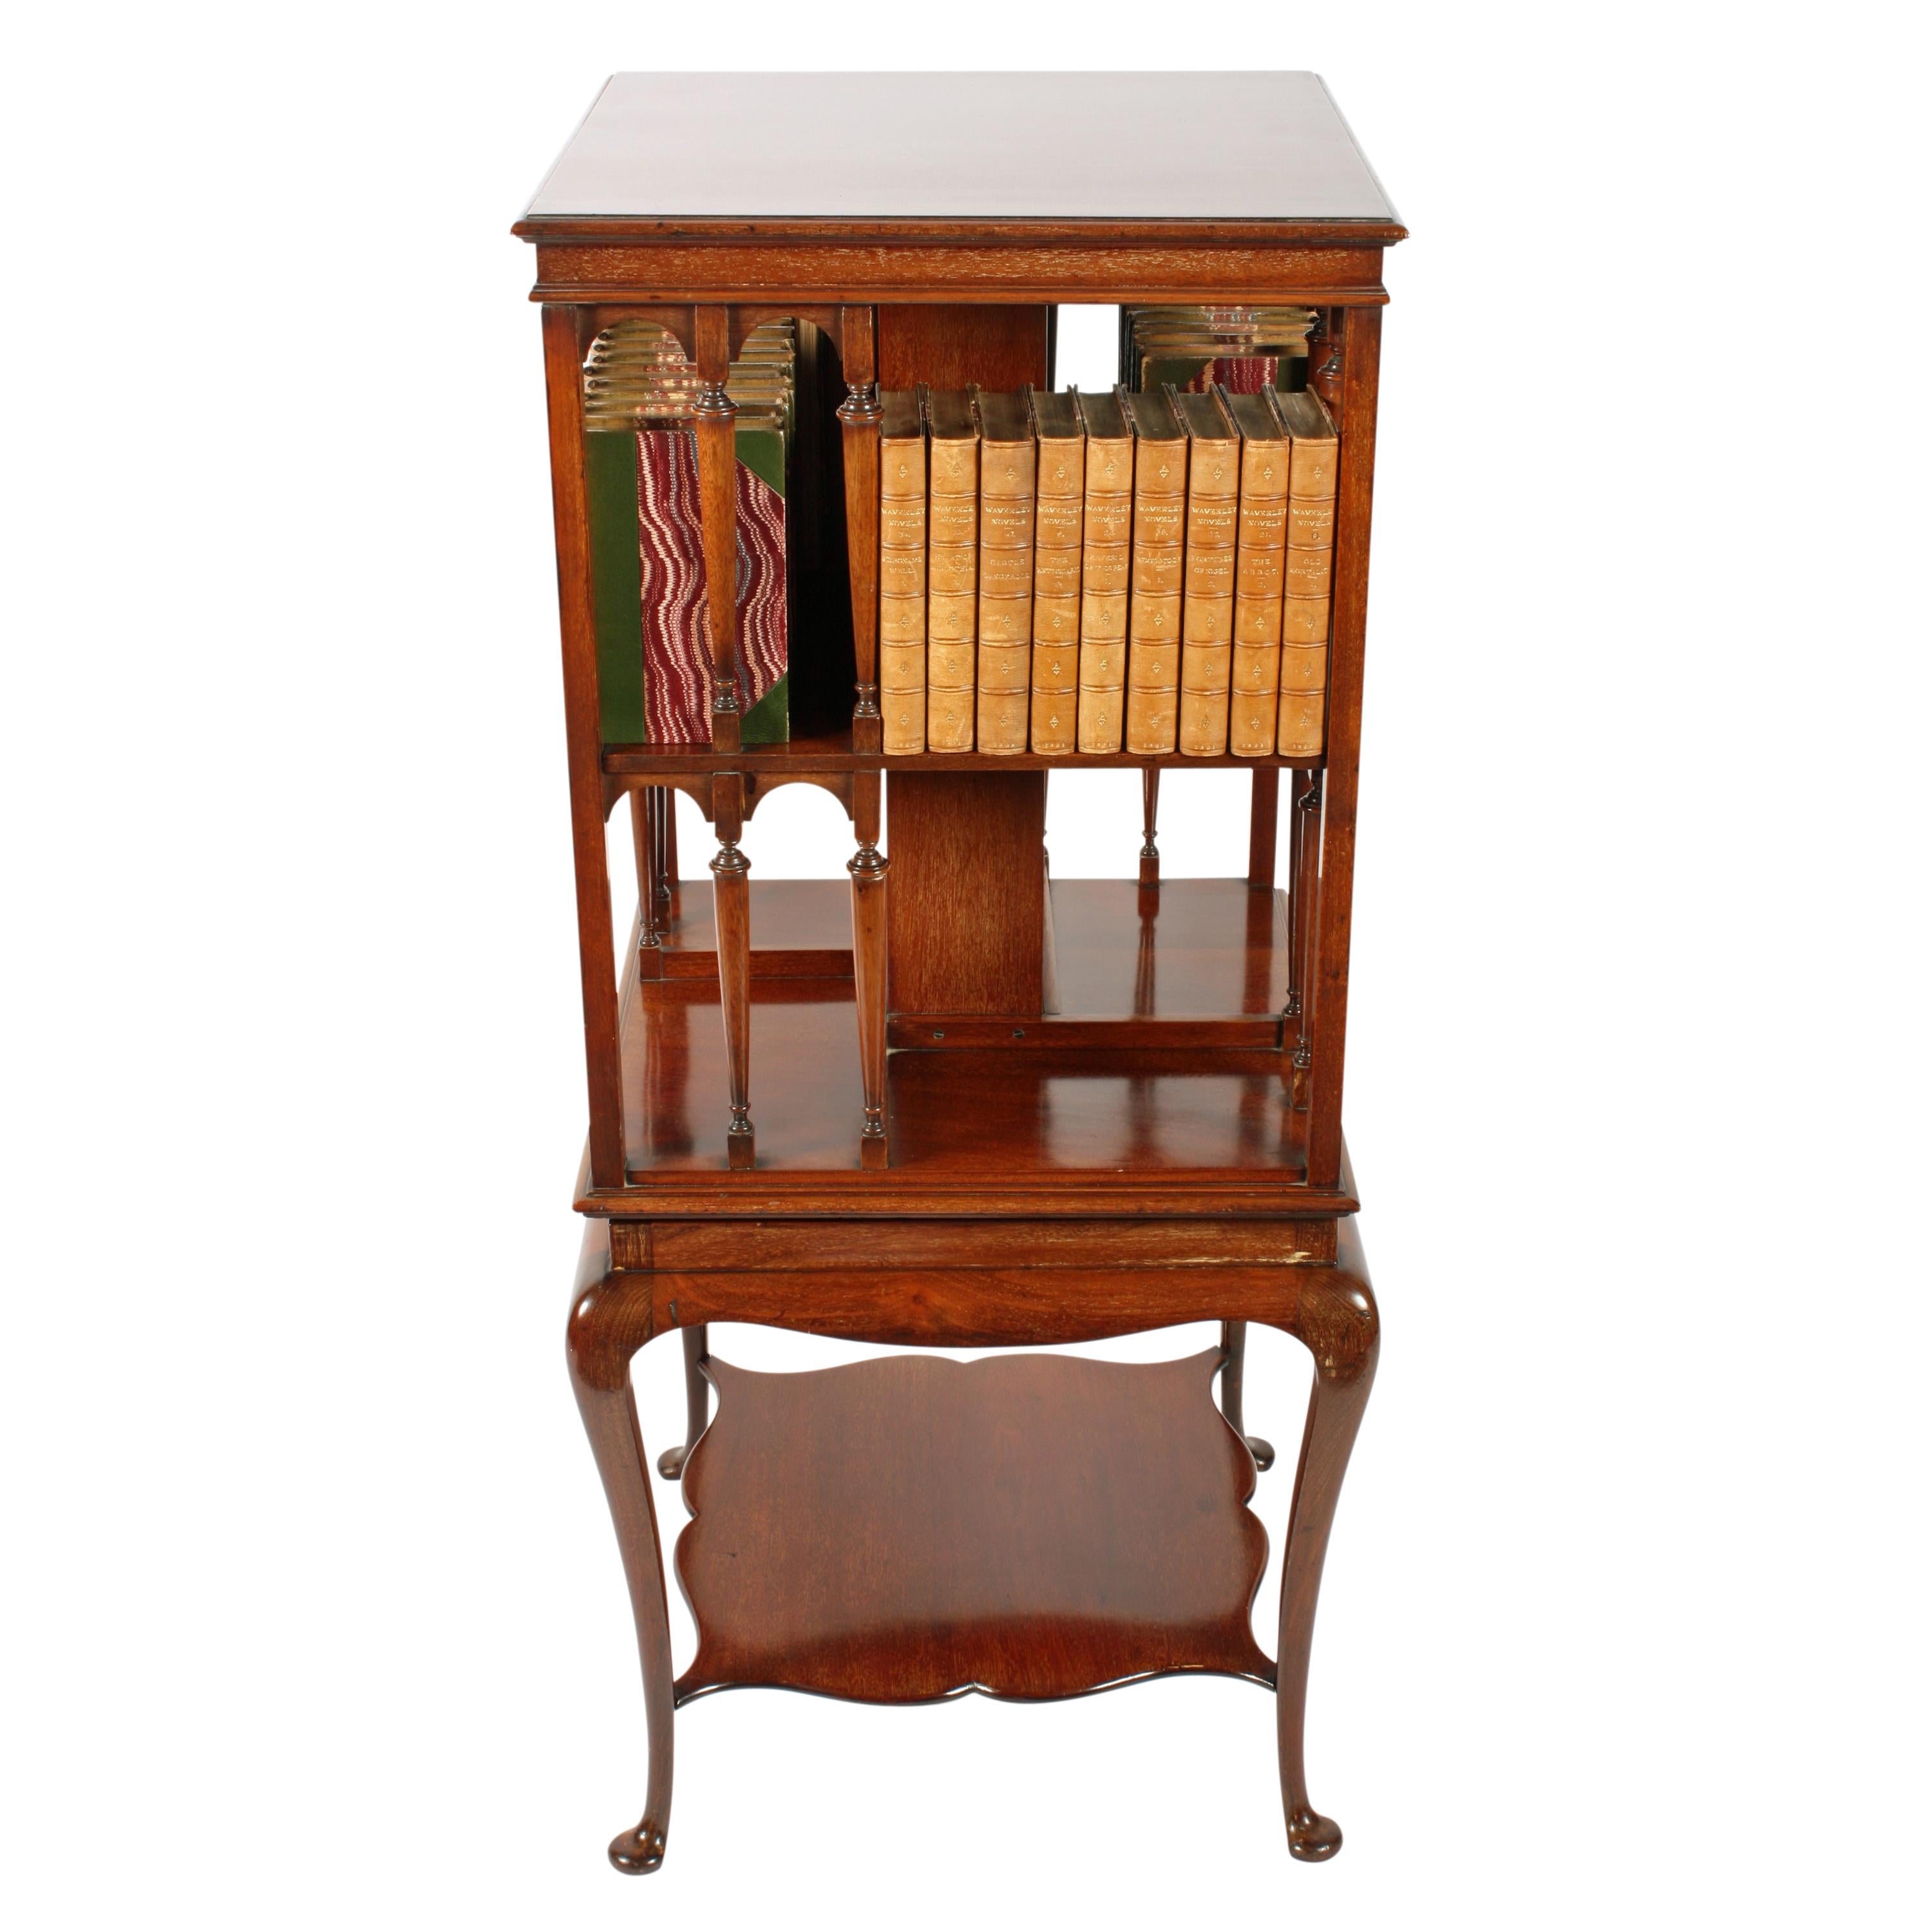 Mahogany revolving bookstand


A late 19th to early 20th century mahogany revolving bookstand on a cabriole legged base.


The solid mahogany bookcase top has two levels of book racks which have decorative turned pillars to the sides.


The